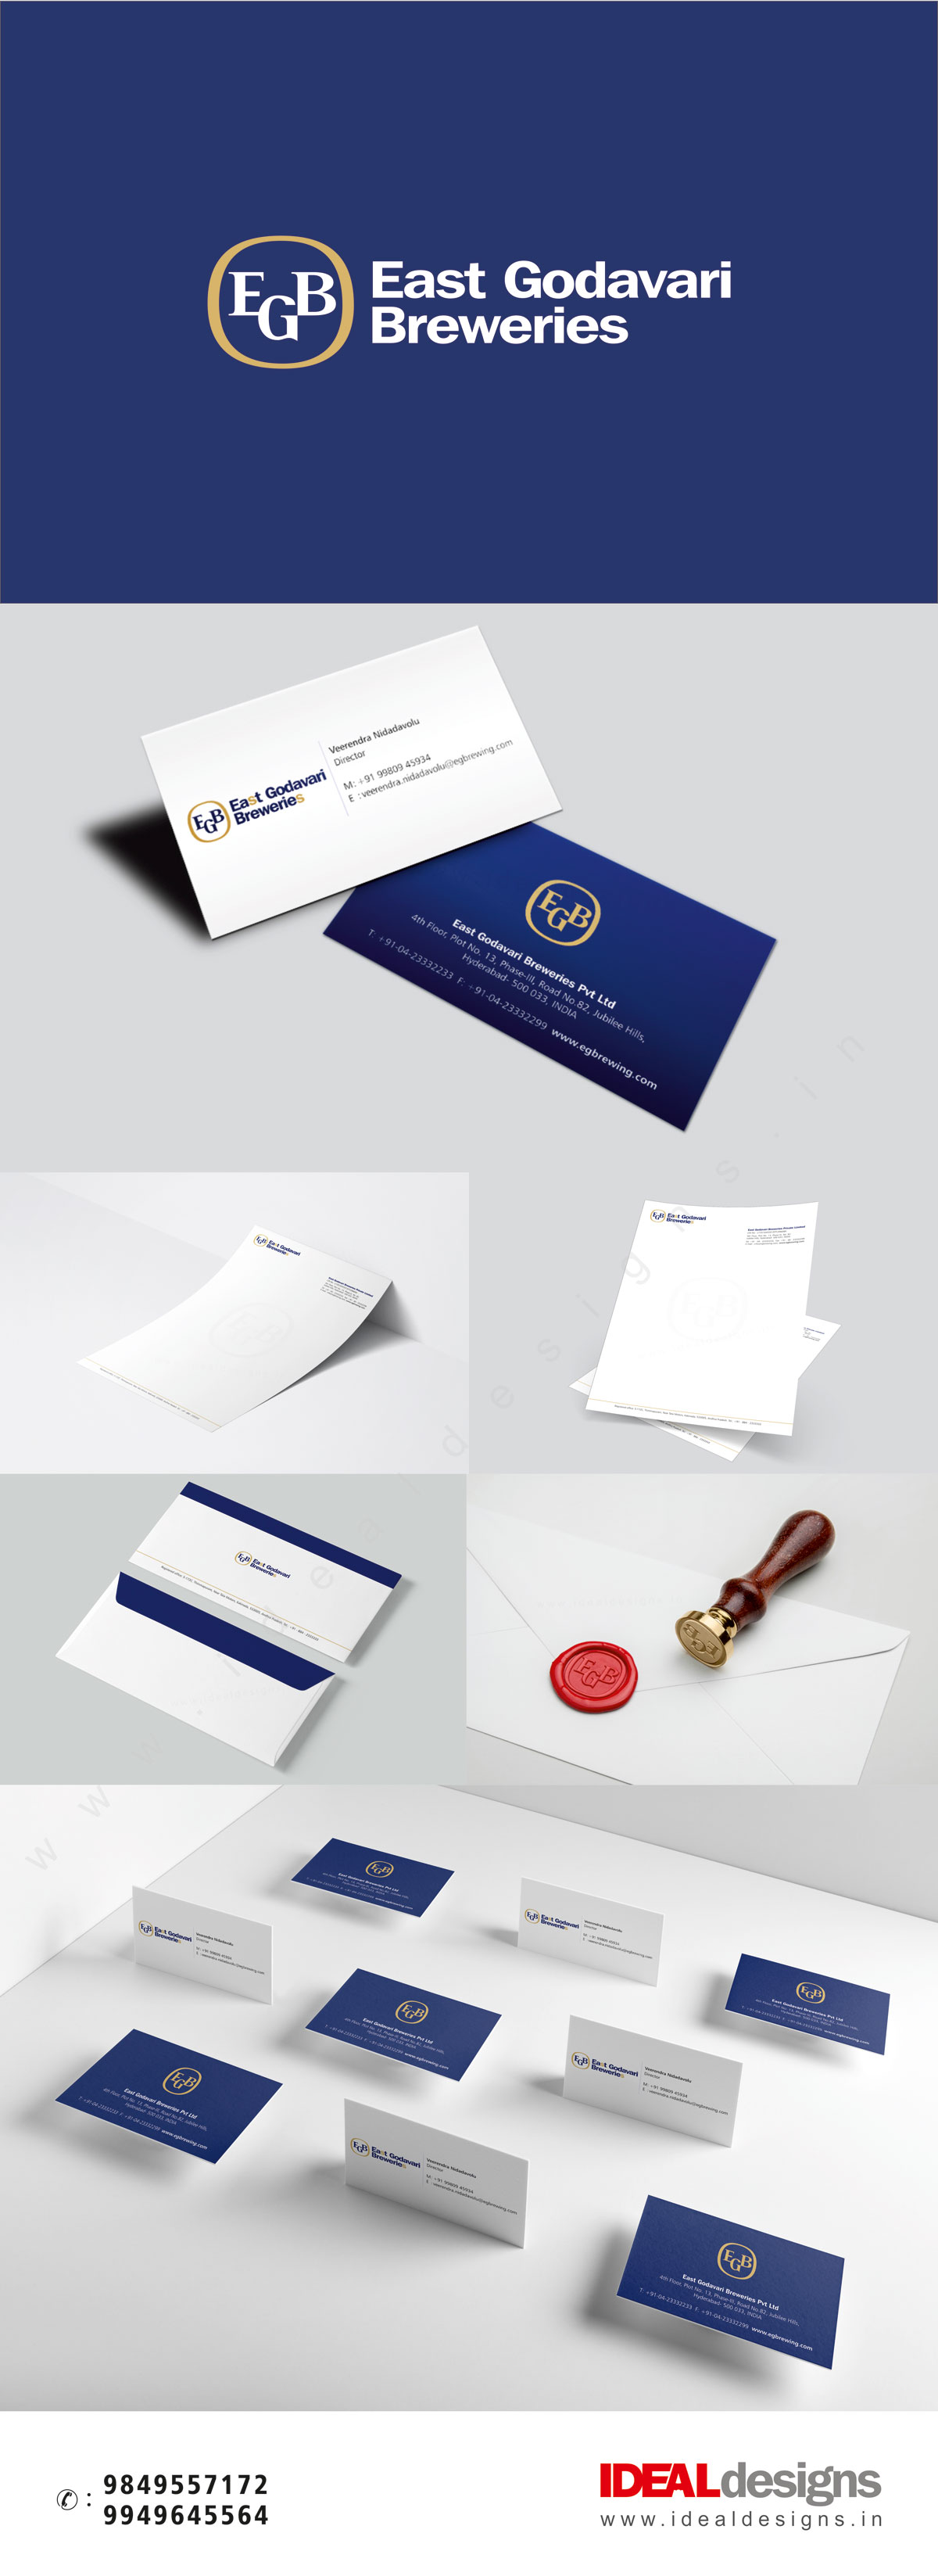 creative-Stationery-Design-Services-in-Hyderabad-professional-Stationery-Design-Services-in-Hyderabad.jpg